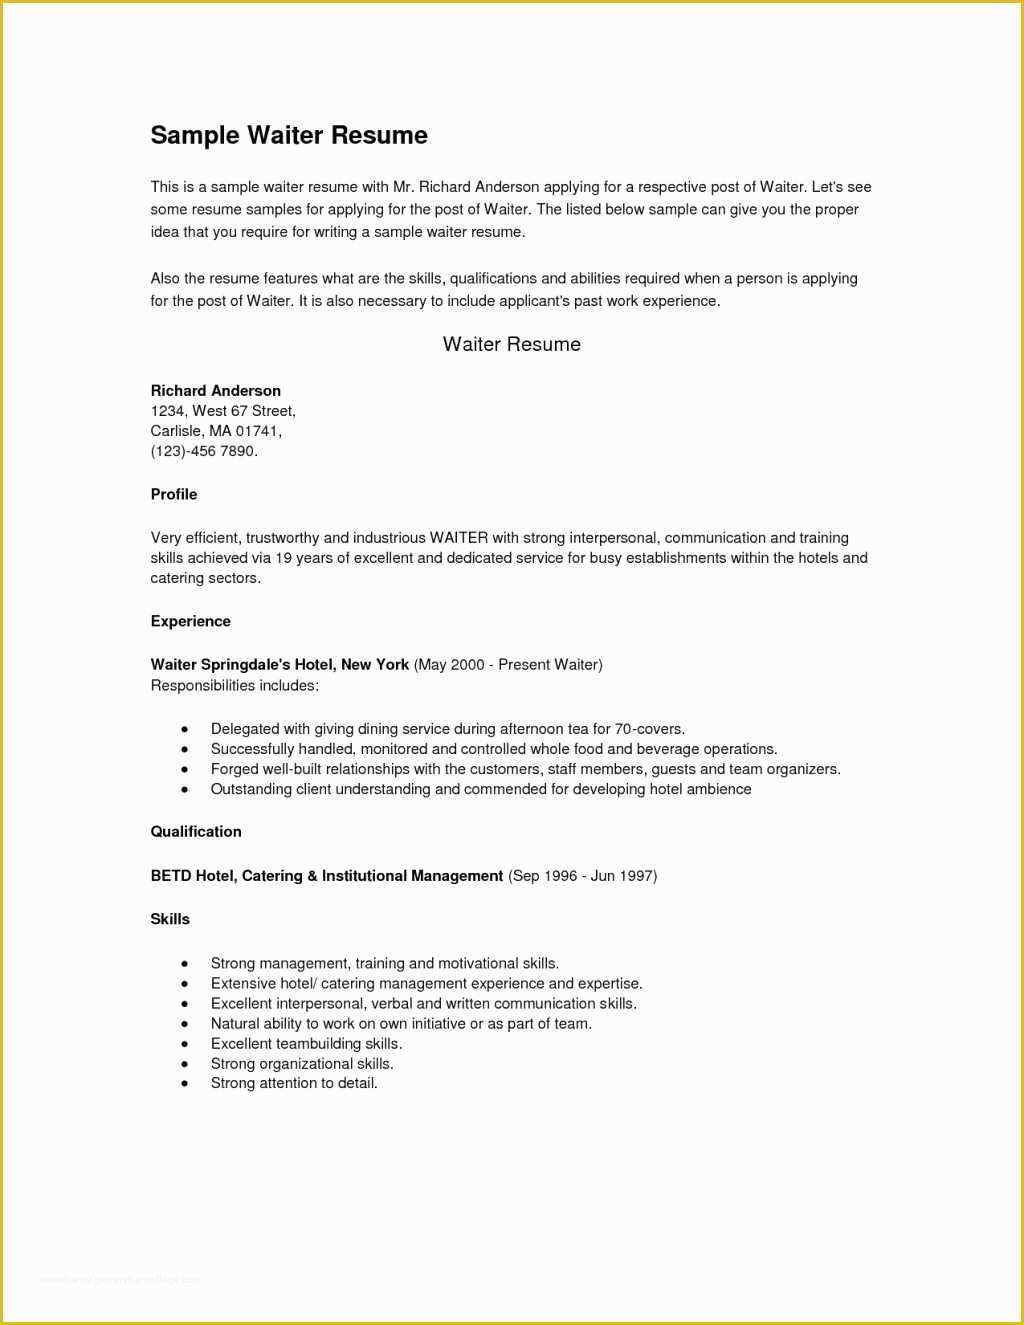 Free Resume Templates for Restaurant Servers Of Restaurant Server Resume Template Free Download Tag 47